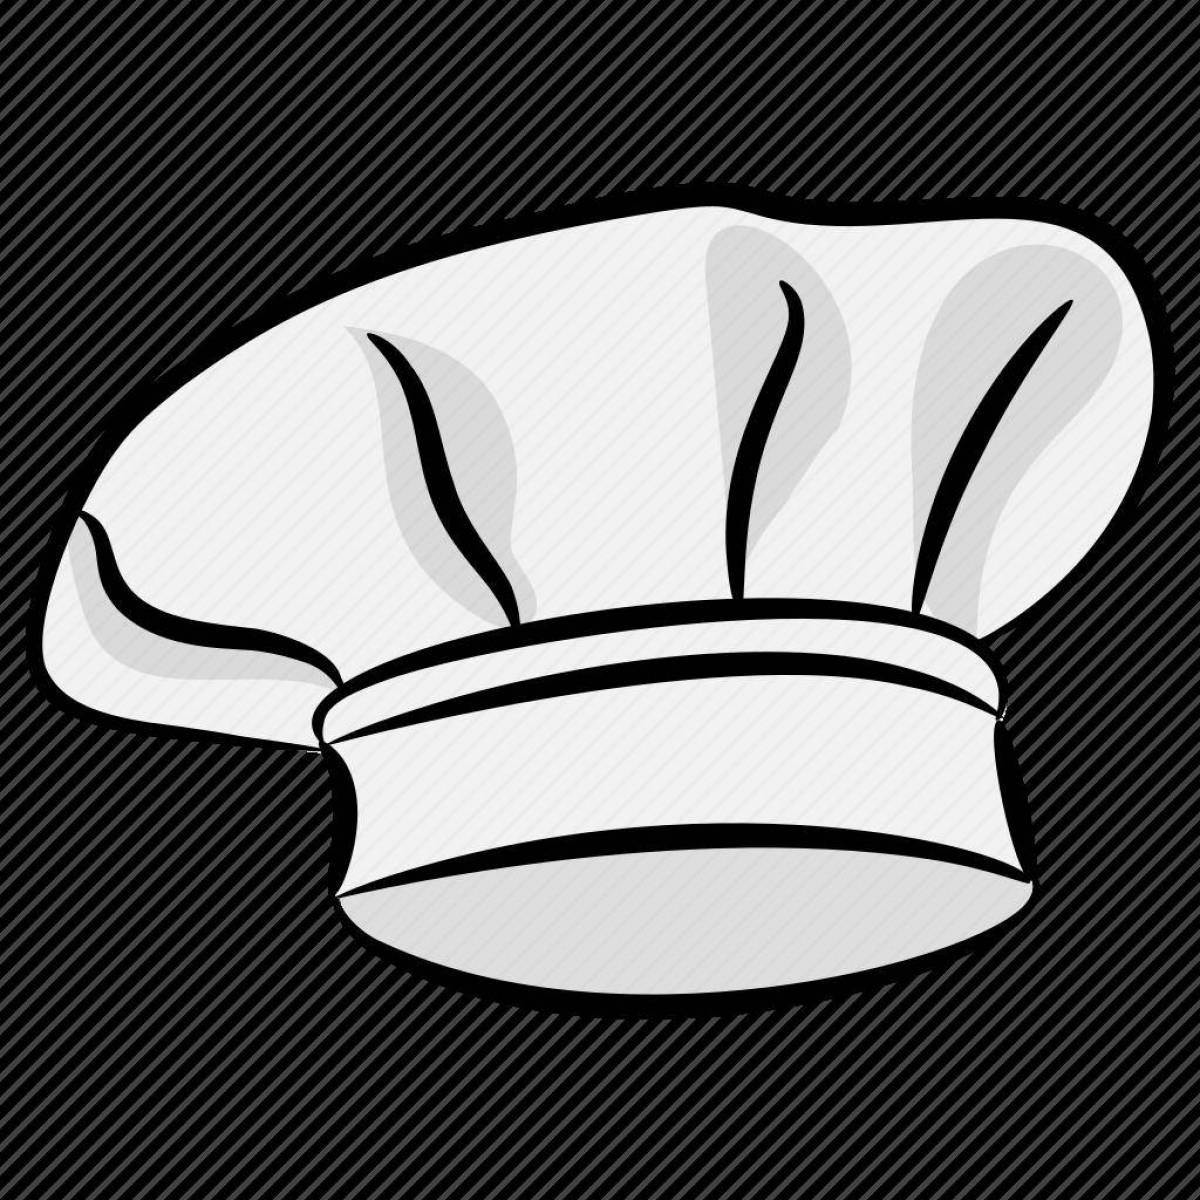 Coloring page dazzling chef's hat